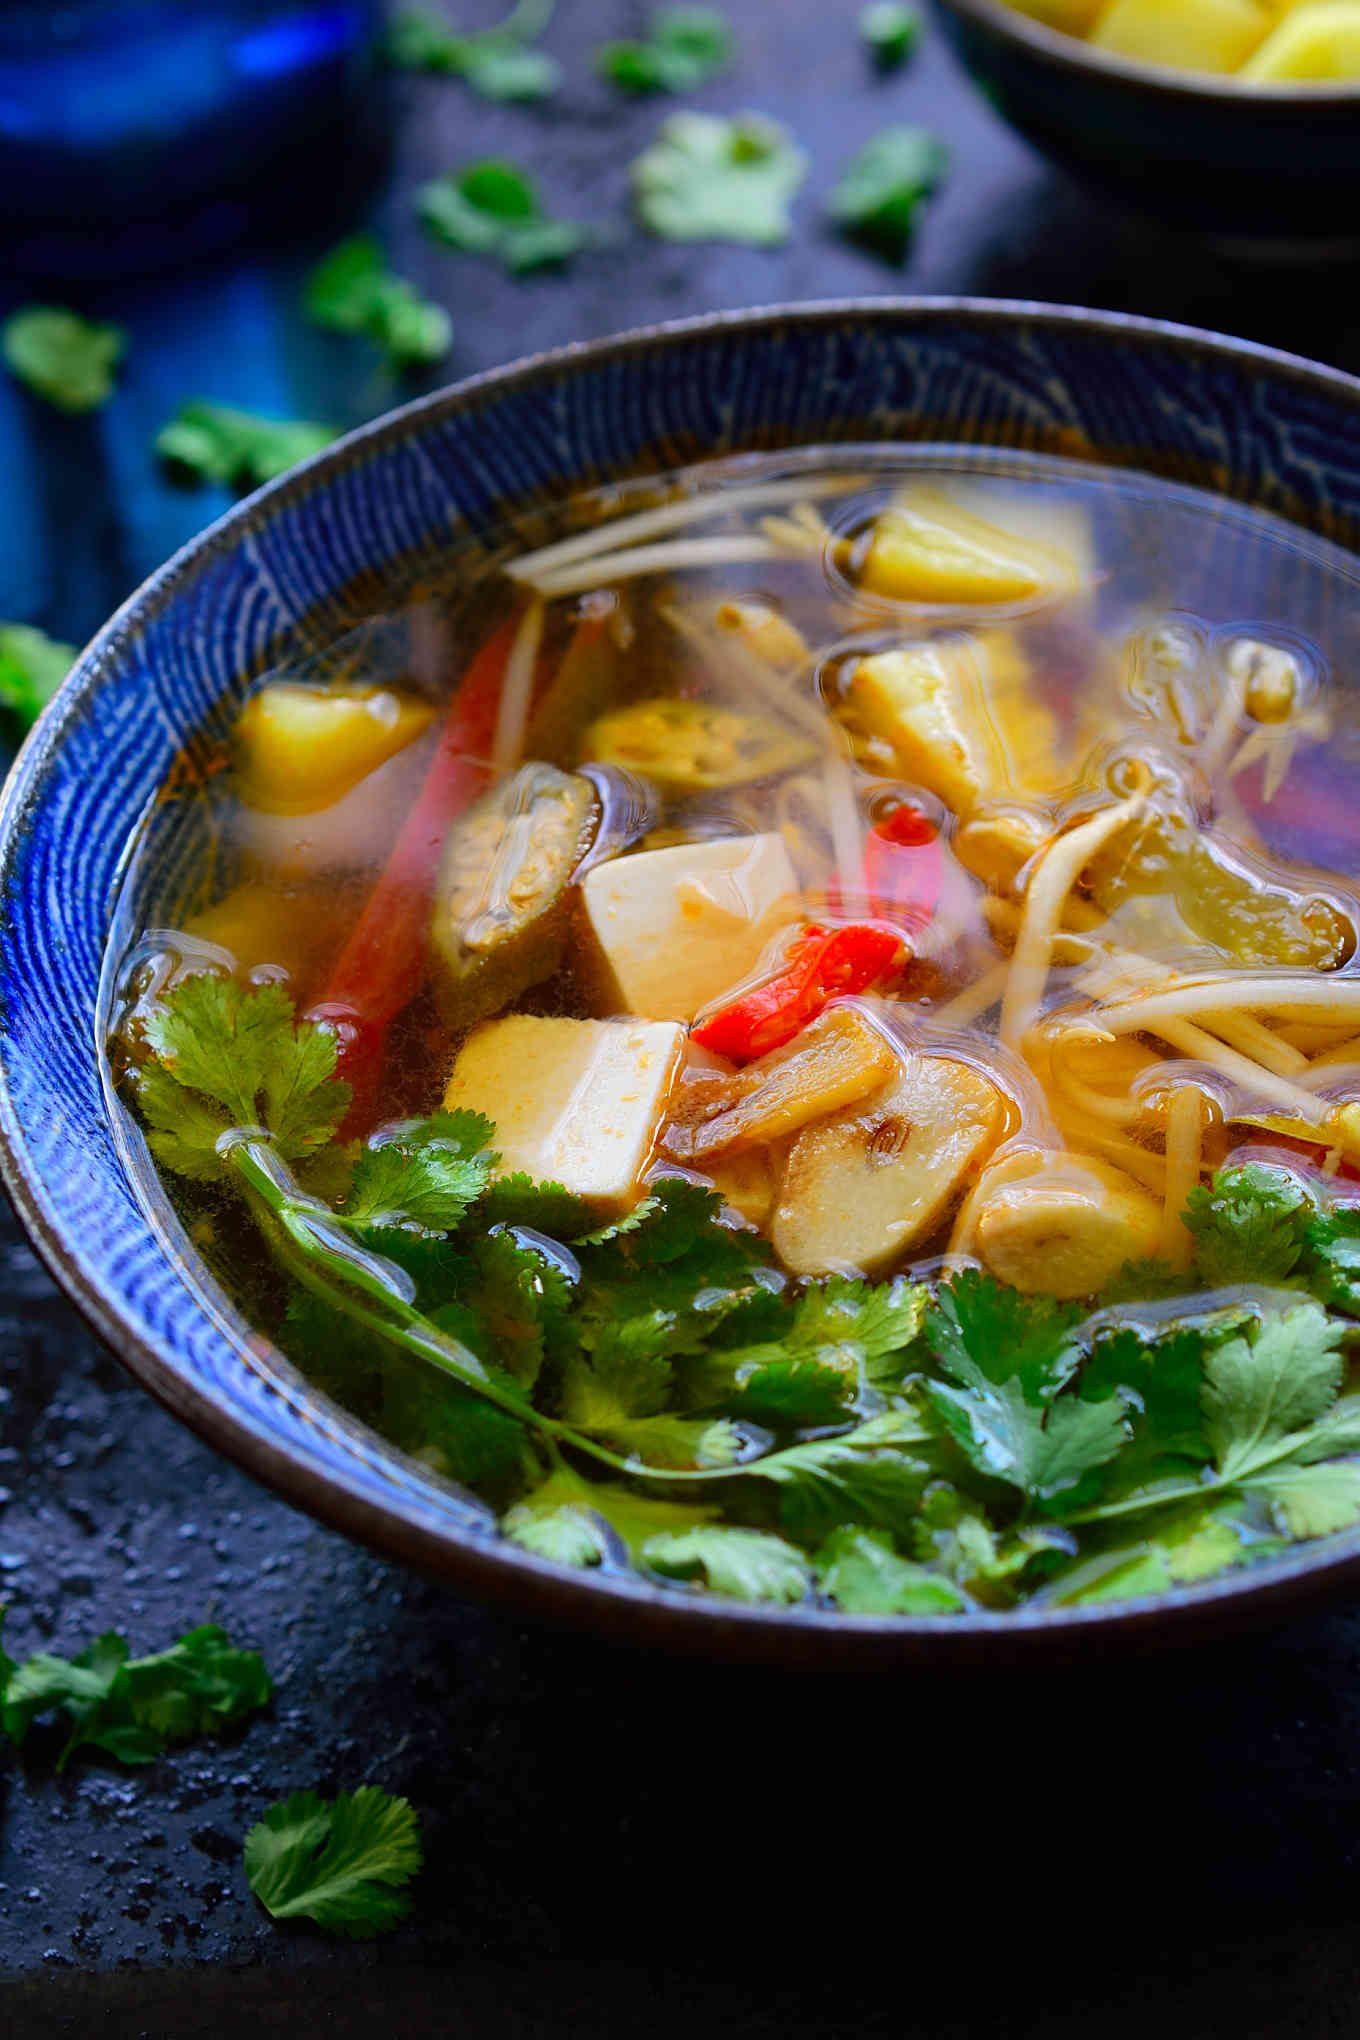 This Vietnamese sour soup recipe is ready in just 15 minutes and so full of complex flavours and textures that it just might be the most delicious bowl of soup you’ve ever tasted. This is a vegetarian version of canh chua with tamarind, pineapple, okra and silken tofu. The combination seems weird but I’m sure it will quickly become your new favourite soup!